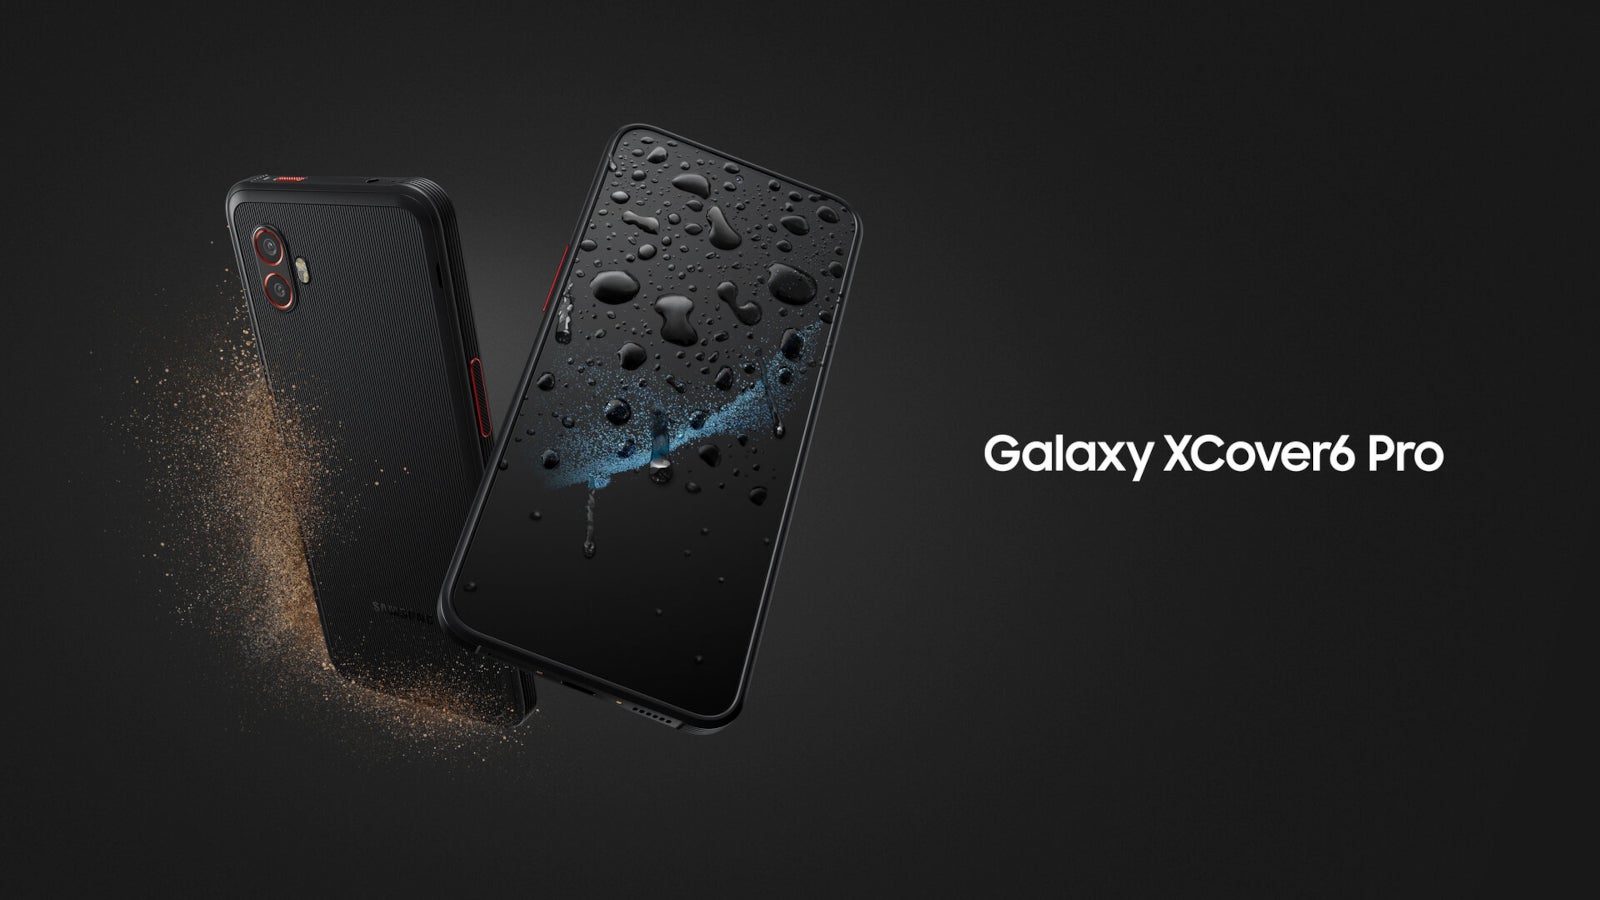 Samsung Galaxy XCover6 Pro - Meet Samsung’s new business-oriented rugged phone, the Galaxy XCover6 Pro